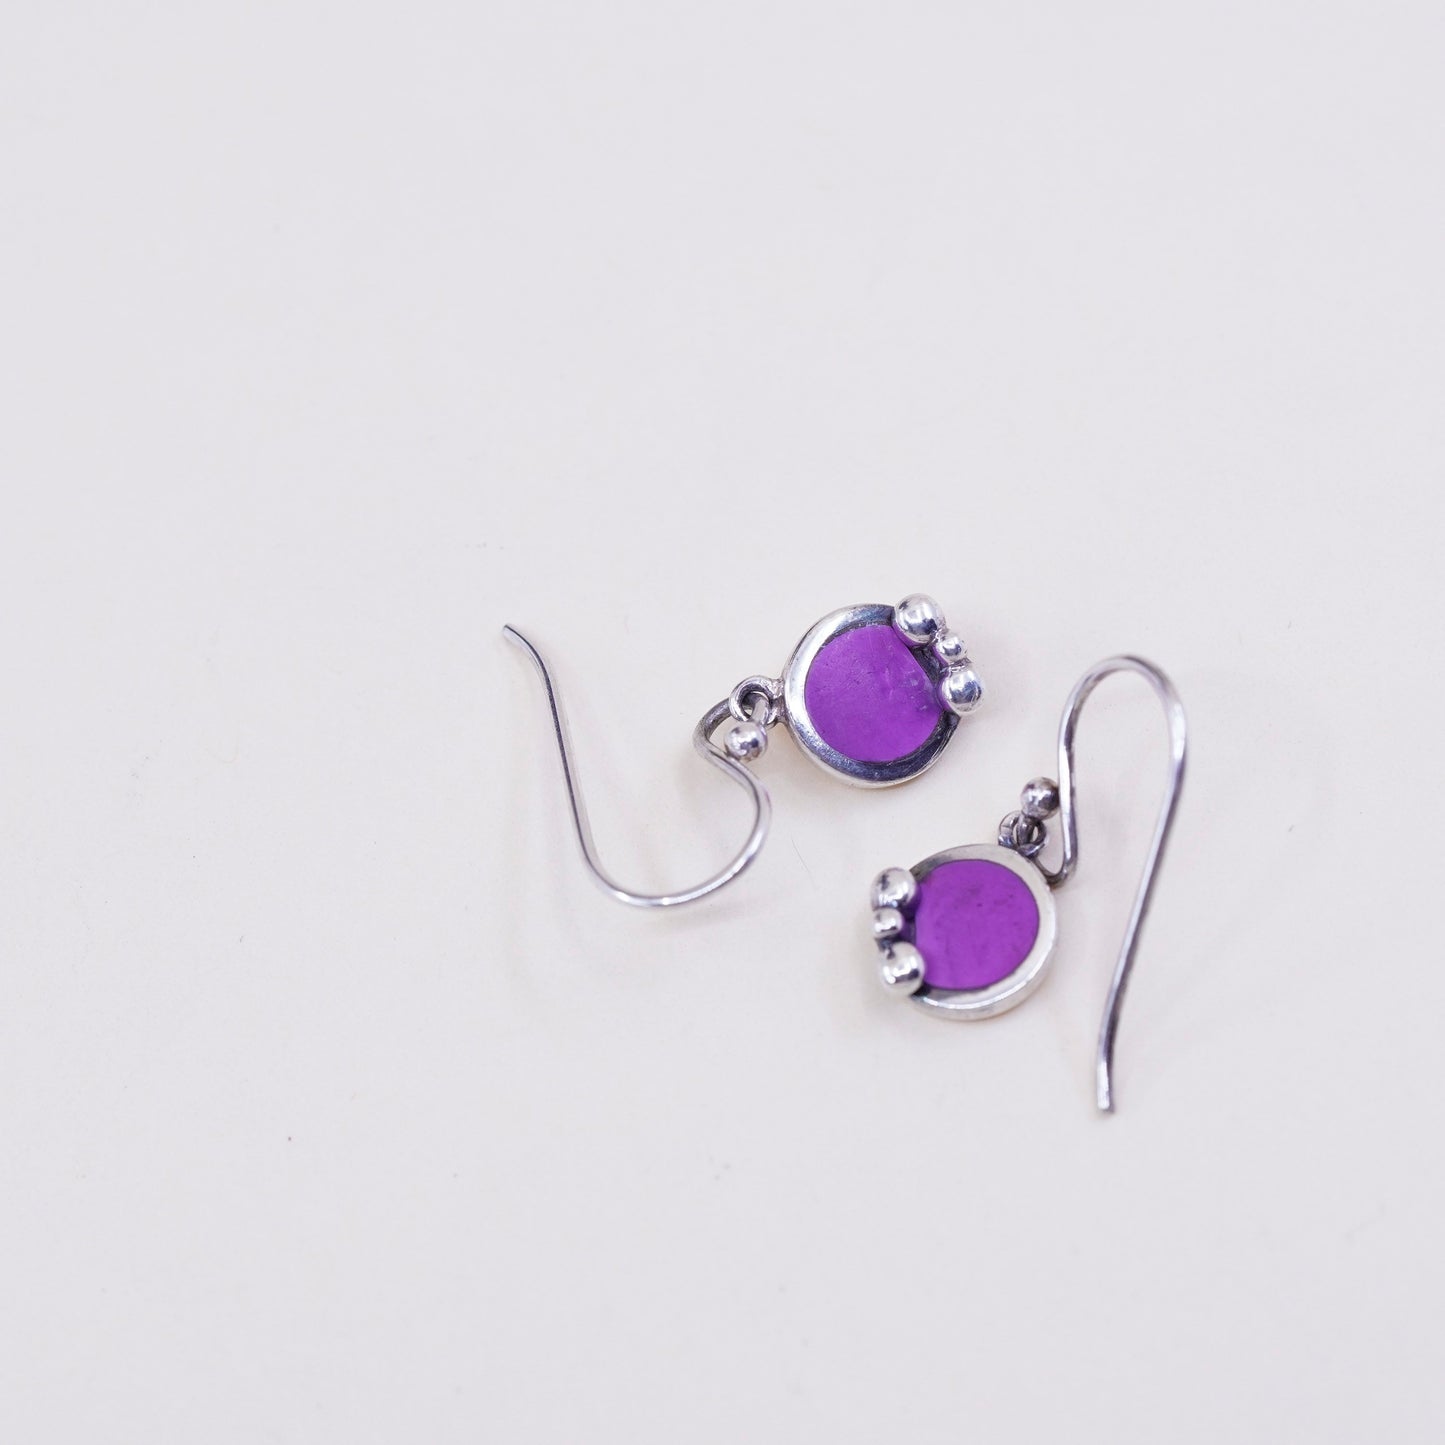 Vintage sterling 925 silver handmade earrings with purple howlite and beads